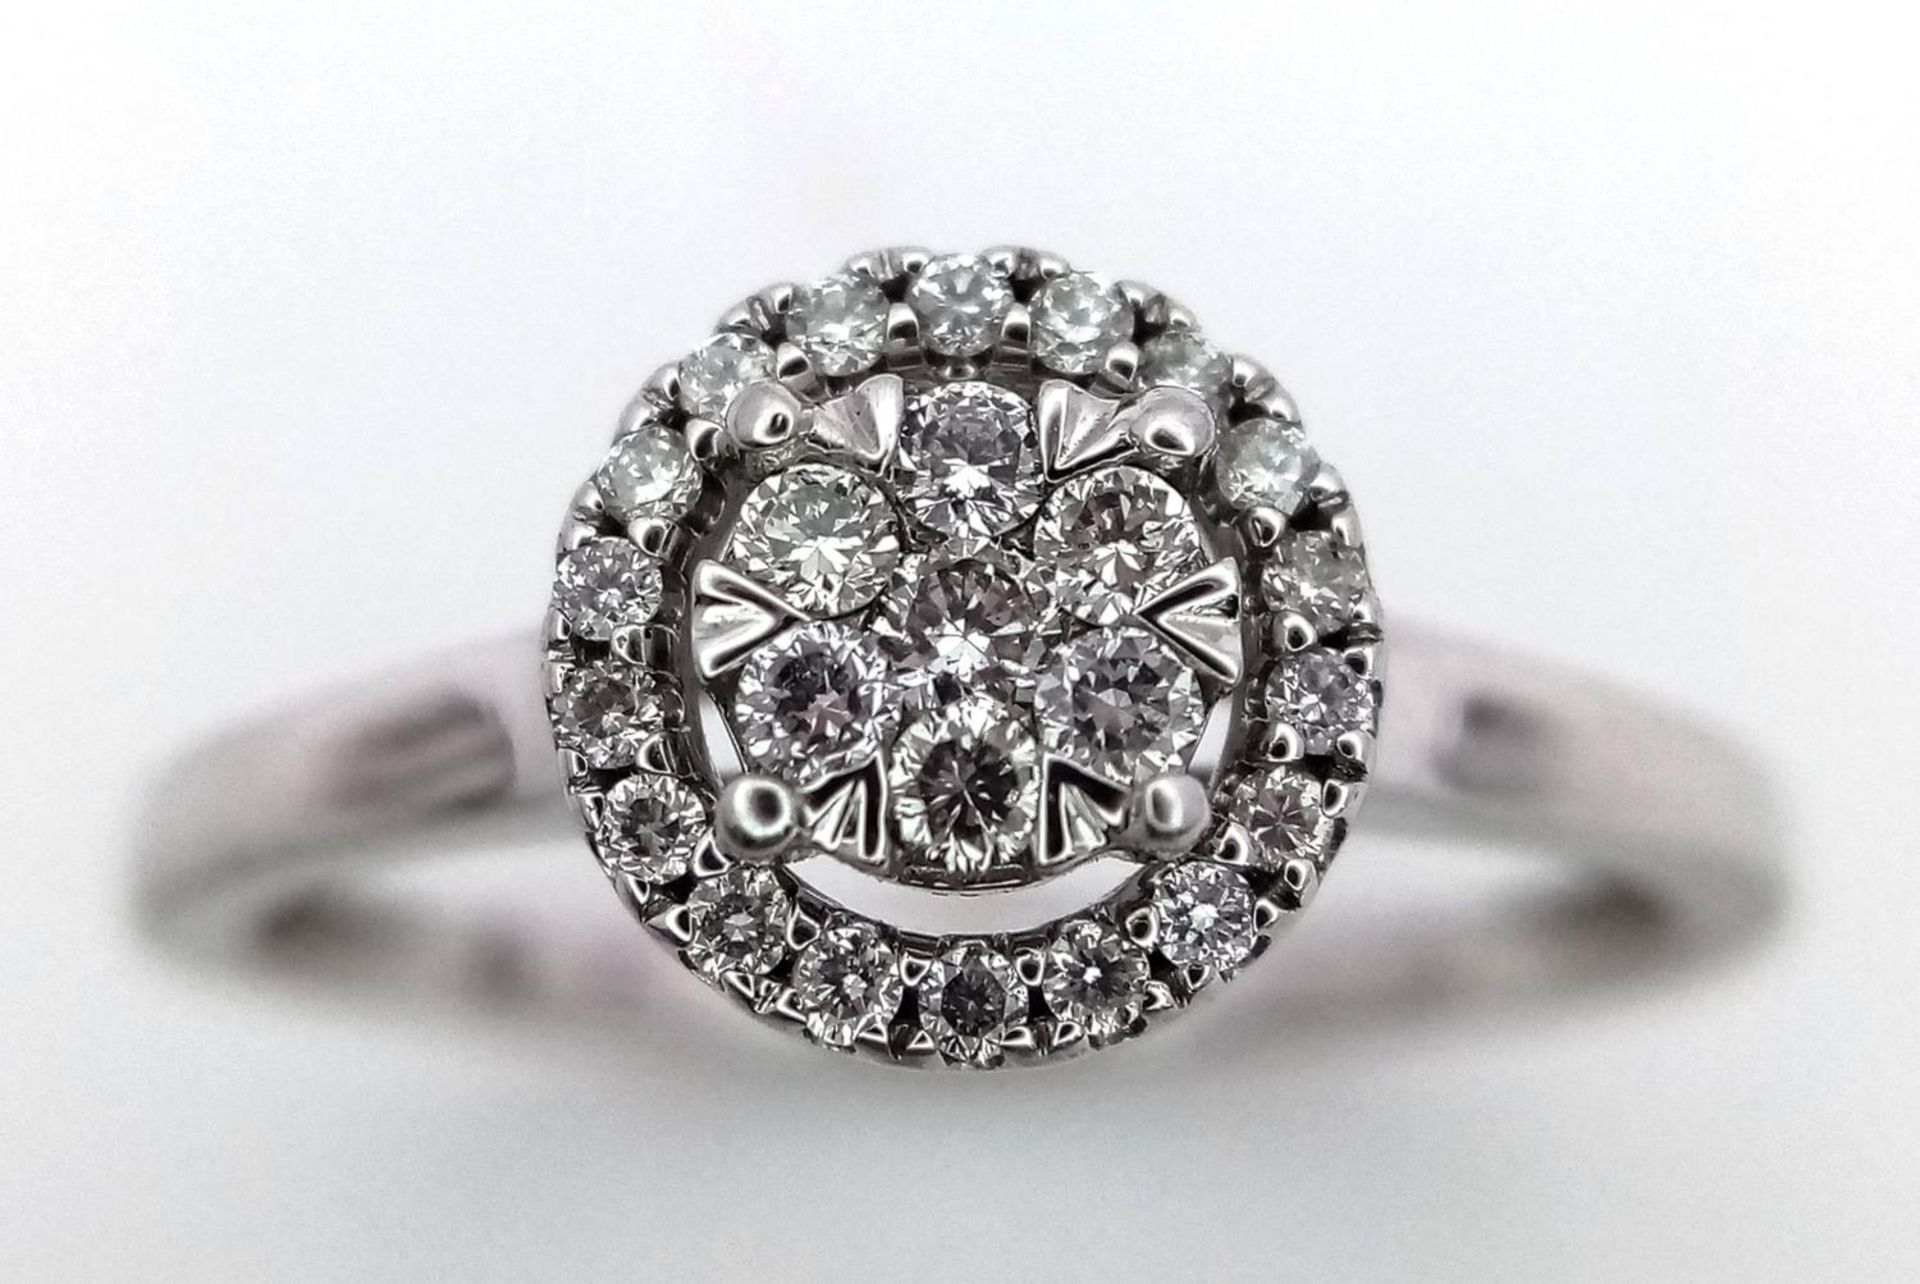 A 9K White Gold Diamond Cluster Ring. A circle of round cut diamonds with a halo of smaller round - Bild 2 aus 5